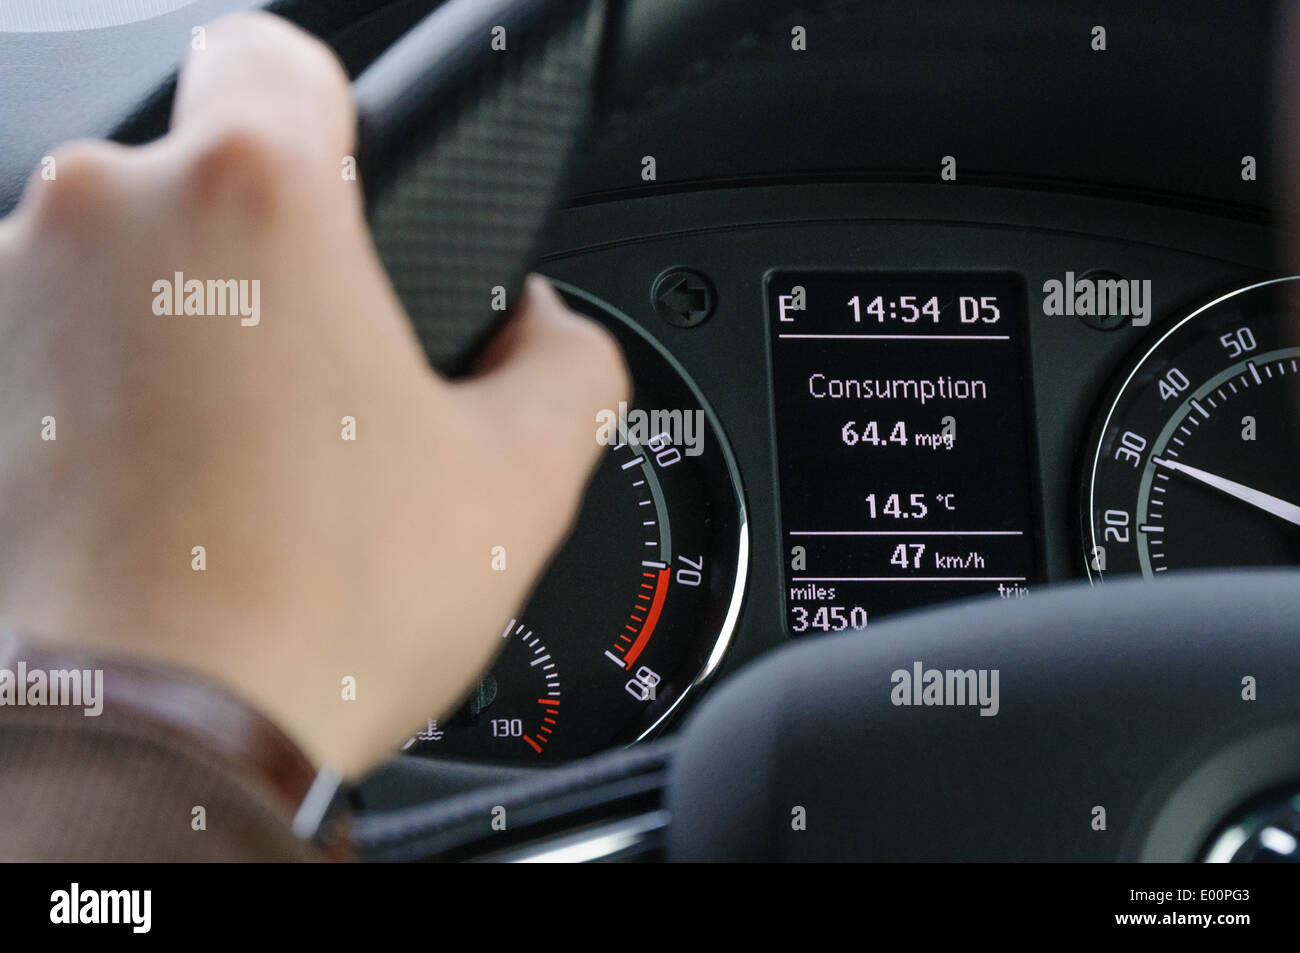 Fuel consumption computer screen displaying high MPG in a Skoda Fabia vRS Stock Photo